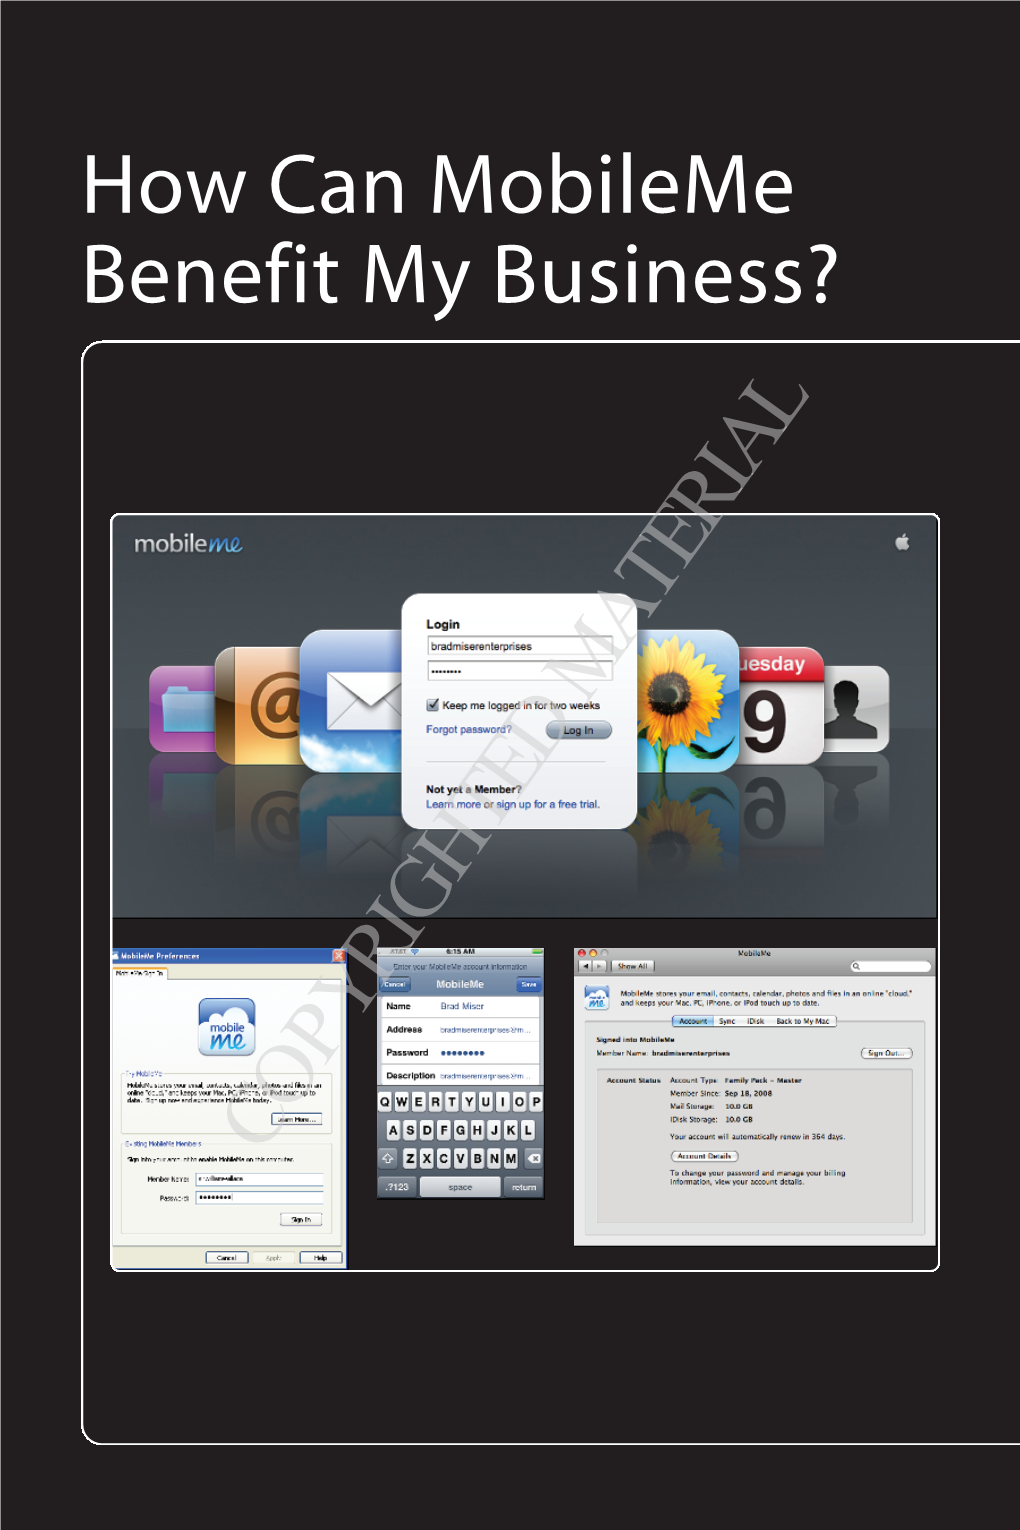 How Can Mobileme Benefit My Business?